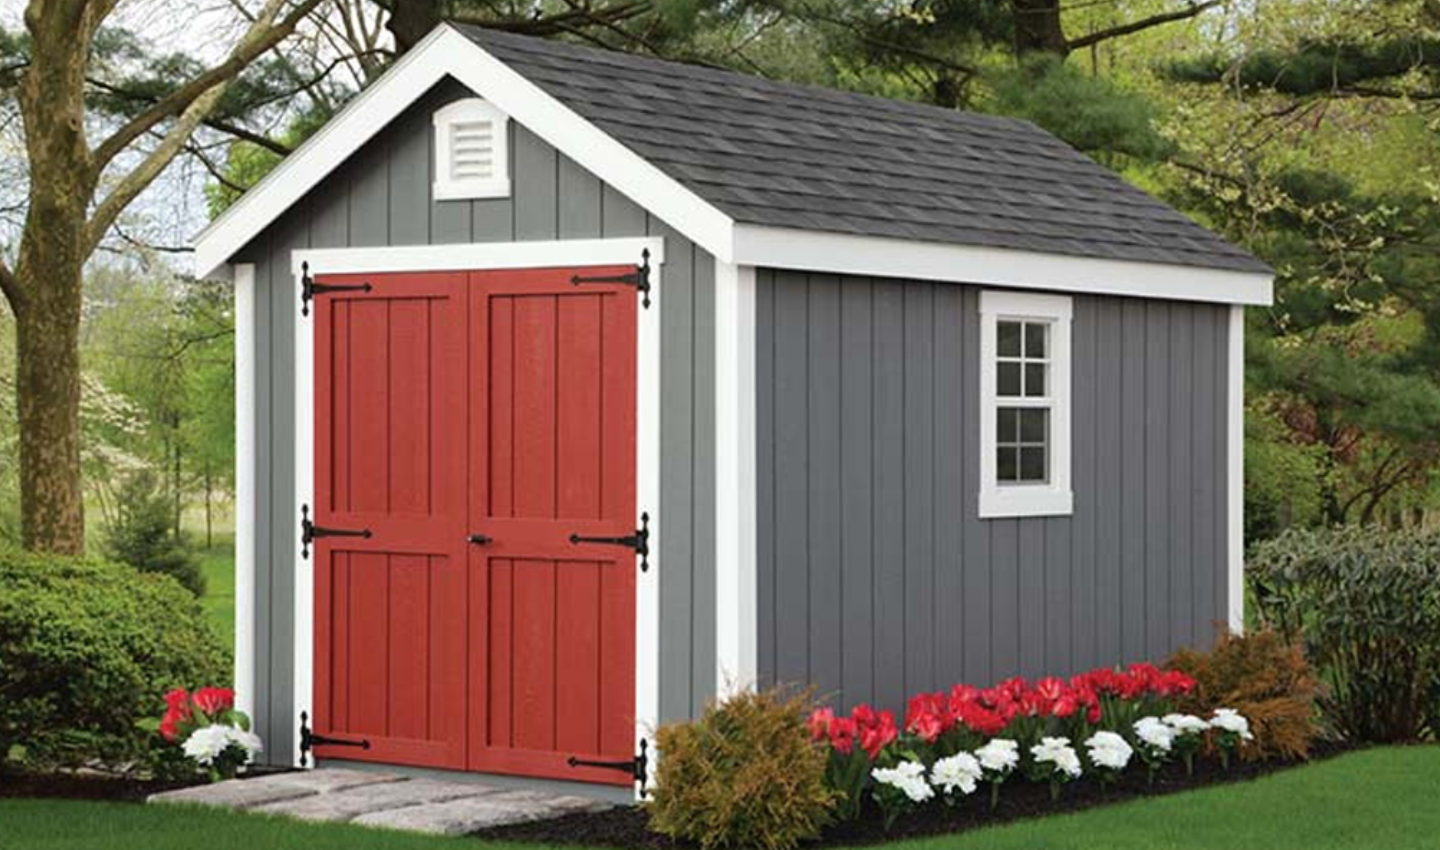 Make Your Shed Ideas a Reality